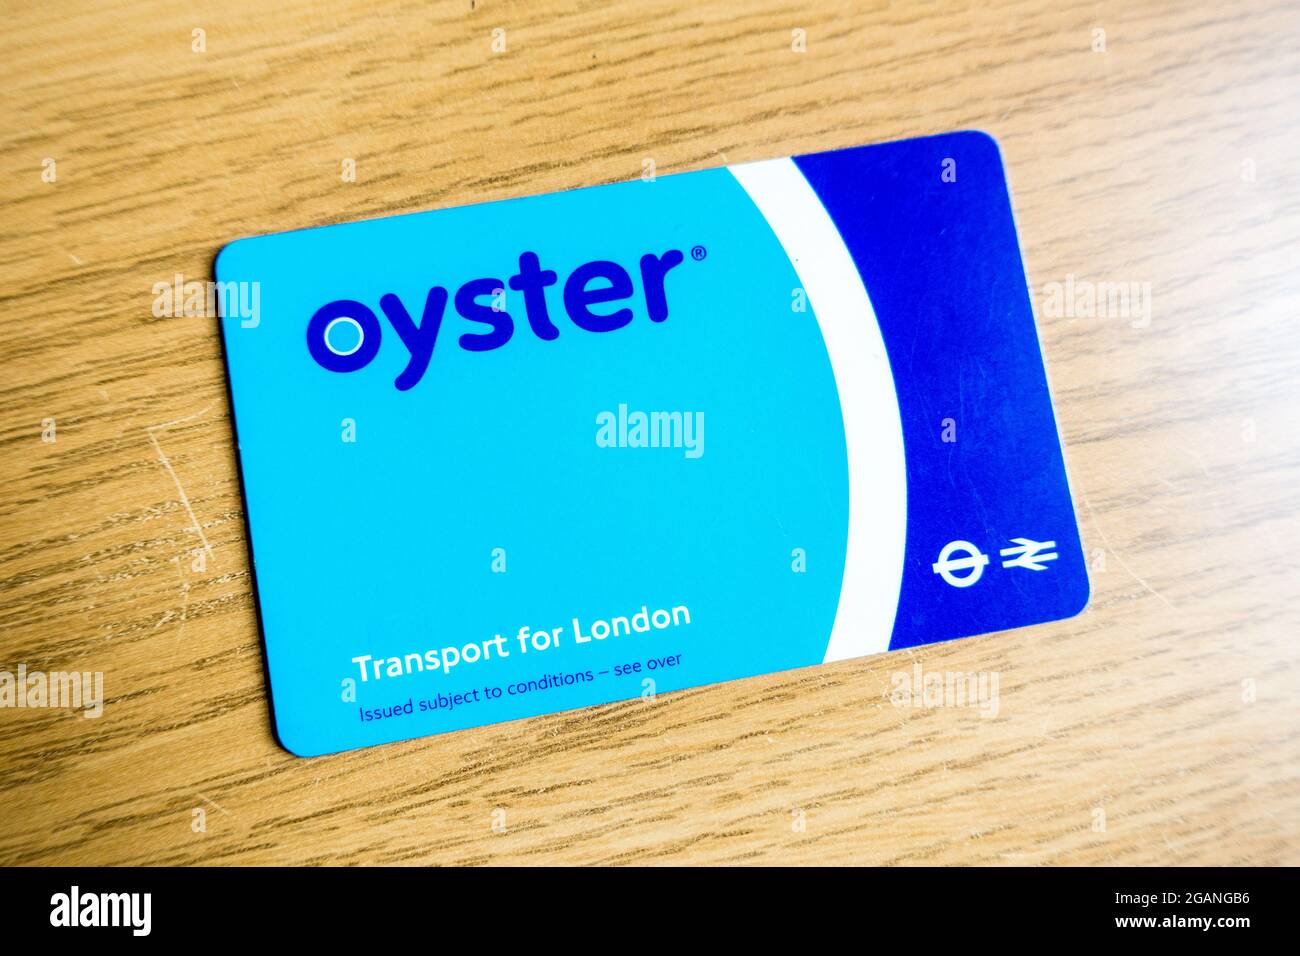 Oyster card the Transport for London travel card which can be used in LondonTubes, Trains, Bus, Tram and Boats. Stock Photo